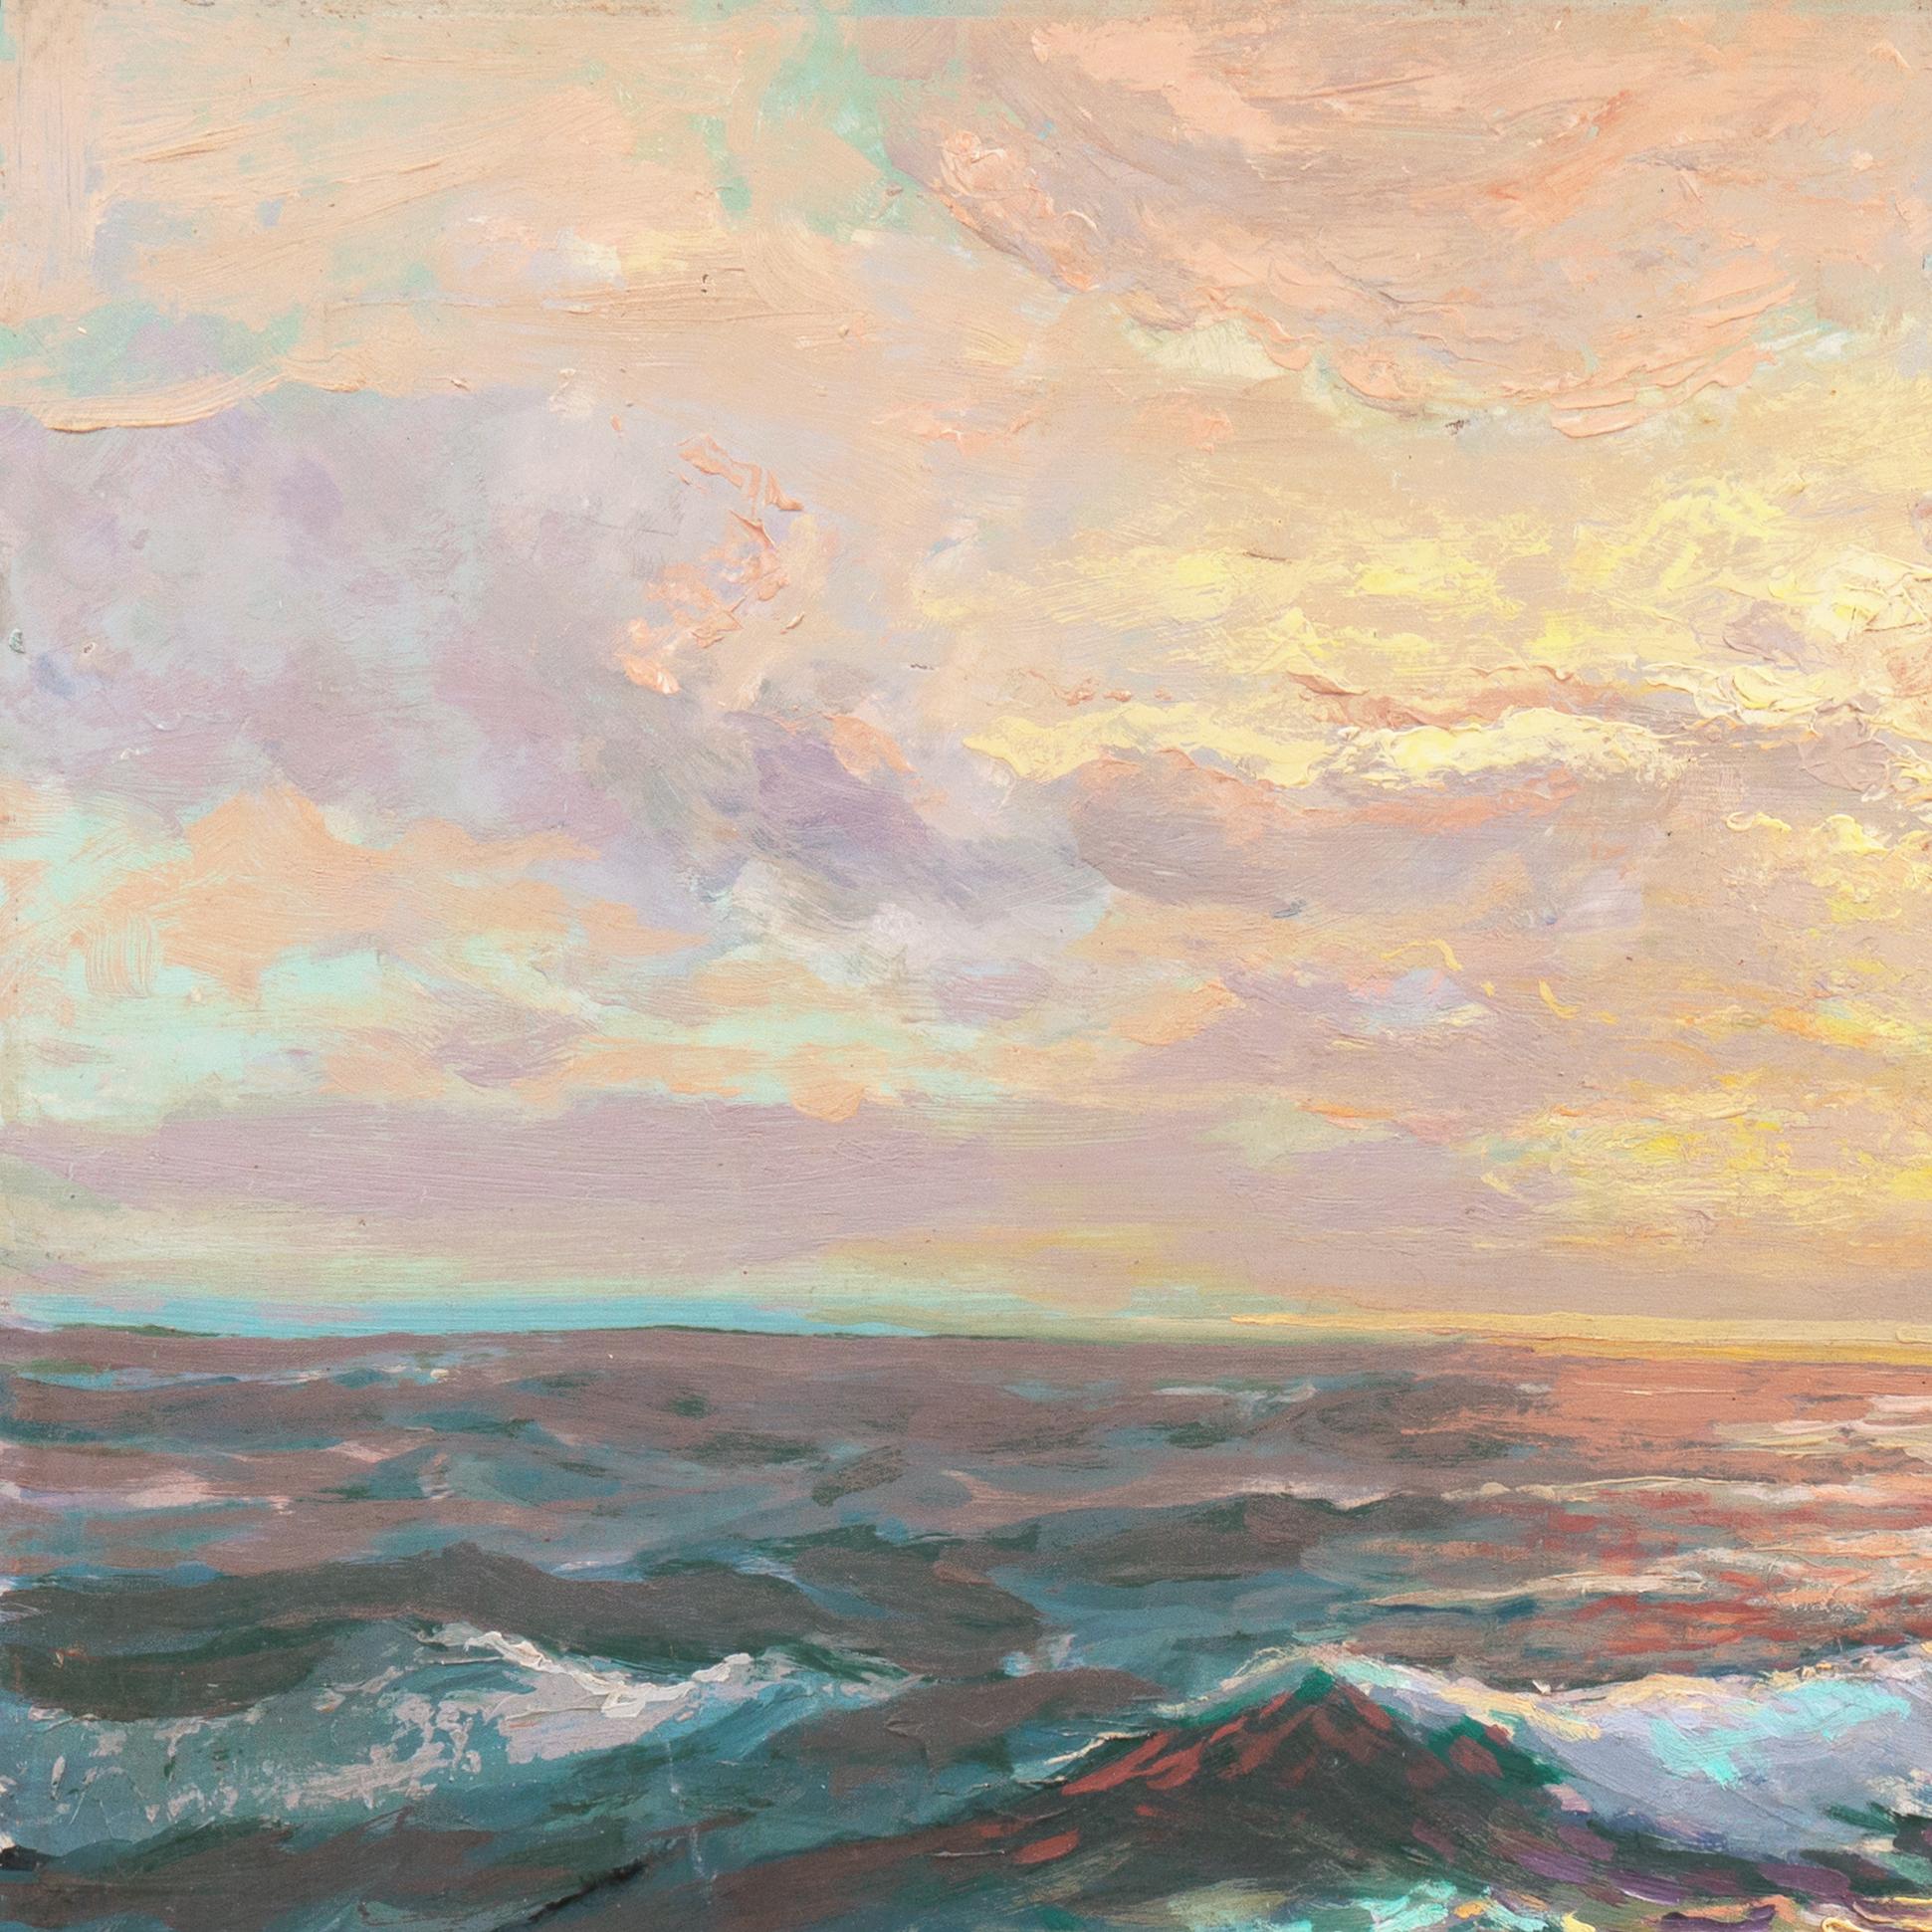 Signed lower right, 'G. Morris' for George North Morris (American, 1915-1996) and painted circa 1950.

An atmospheric seascape showing the golden rays of a late sunset spilling over rolling whitecaps.

Artist, teacher and writer George North Morris